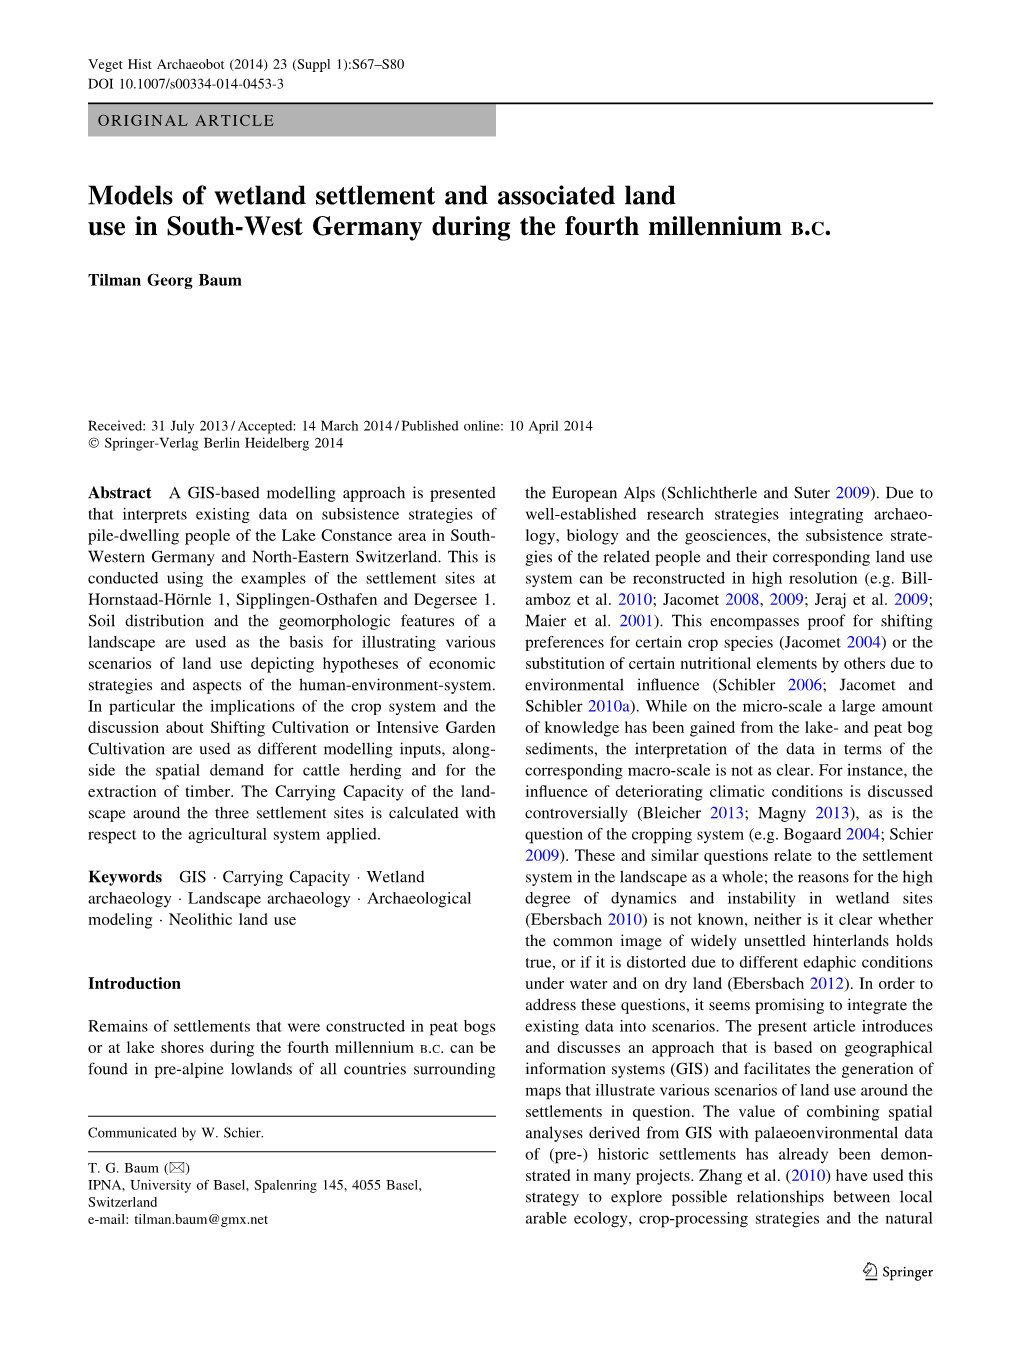 Models of Wetland Settlement and Associated Land Use in South-West Germany During the Fourth Millennium B.C